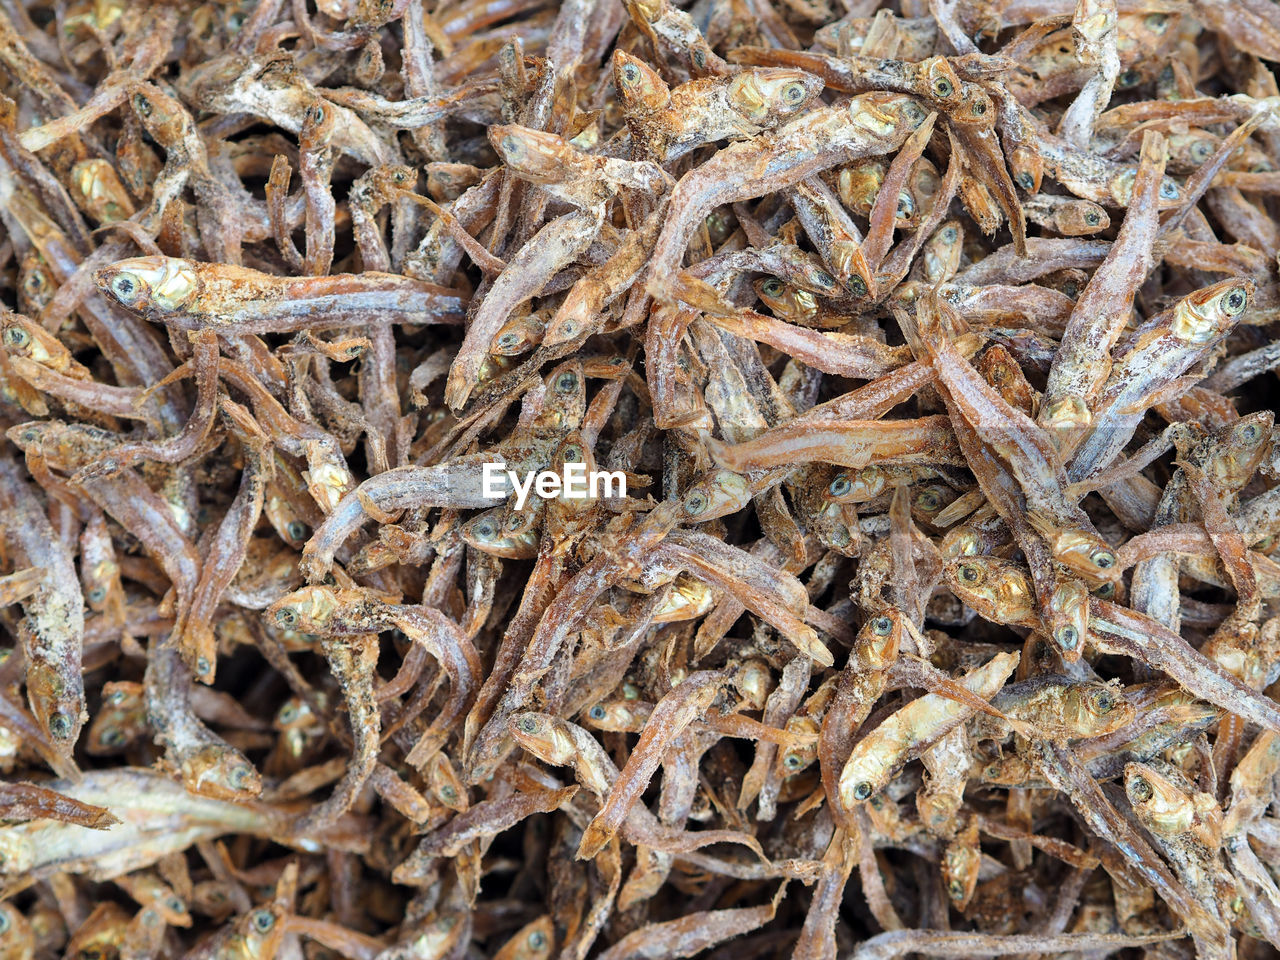 Full frame shot of dried fish in market